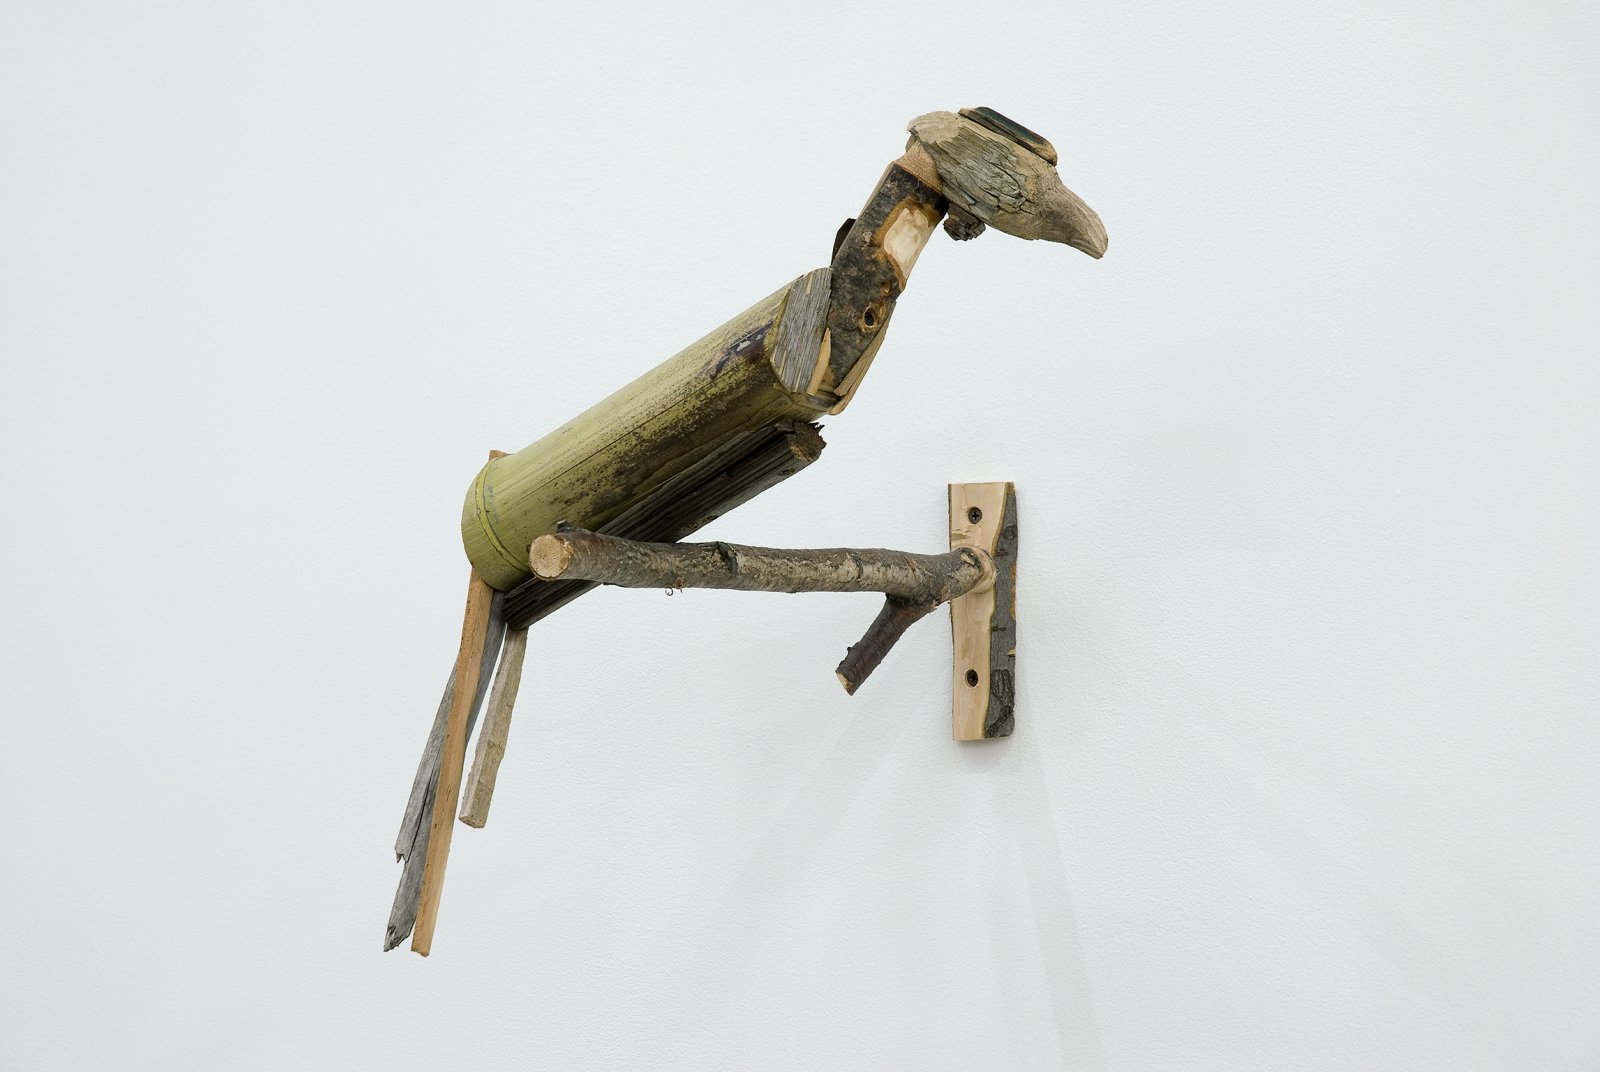 Gareth Moore, Meanwhile the wooden birds were nailed on the trees... from Uncertain Pilgrimage, 2006-2009 by Ashes Withyman